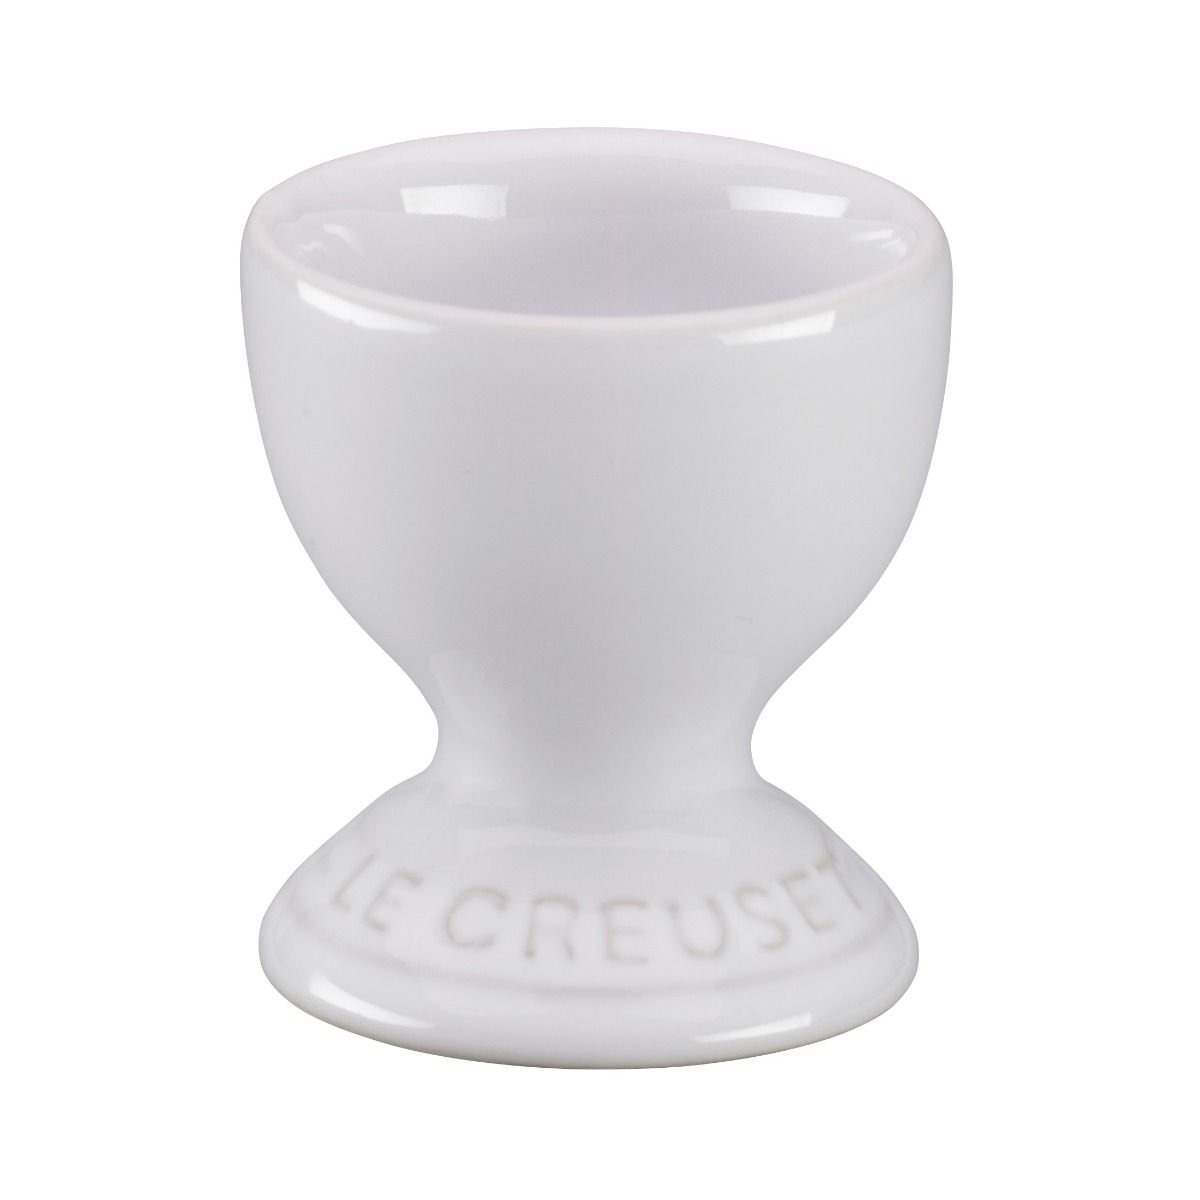 Double Soft Boiled Egg Cup With Attached Plate, Ceramic Egg Cup